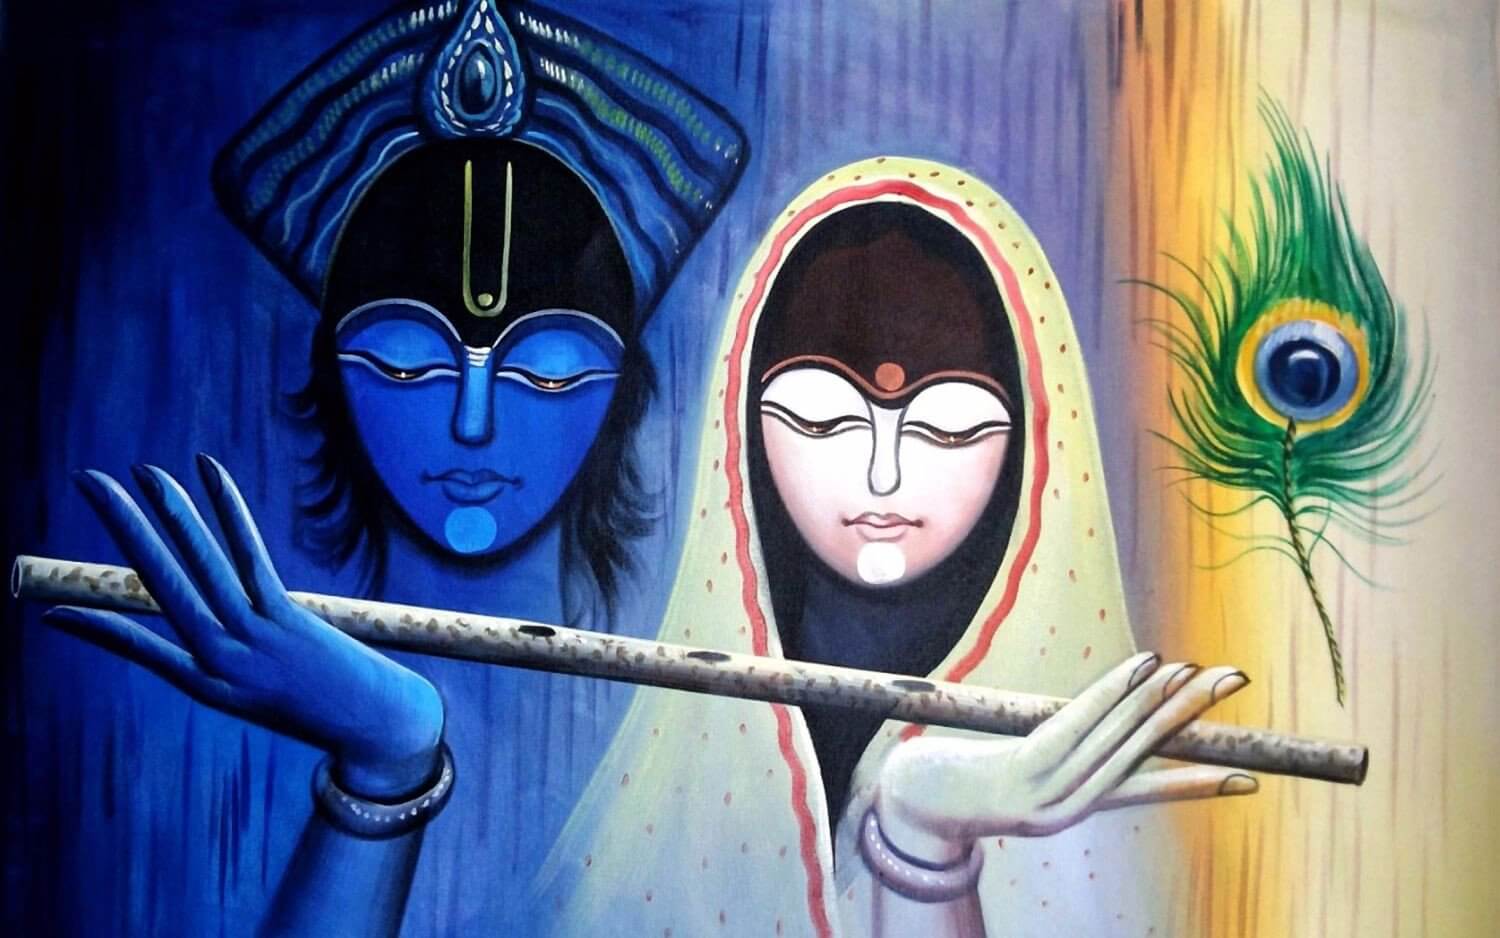 Unconditional love of Krishna Radha - A Small Story.